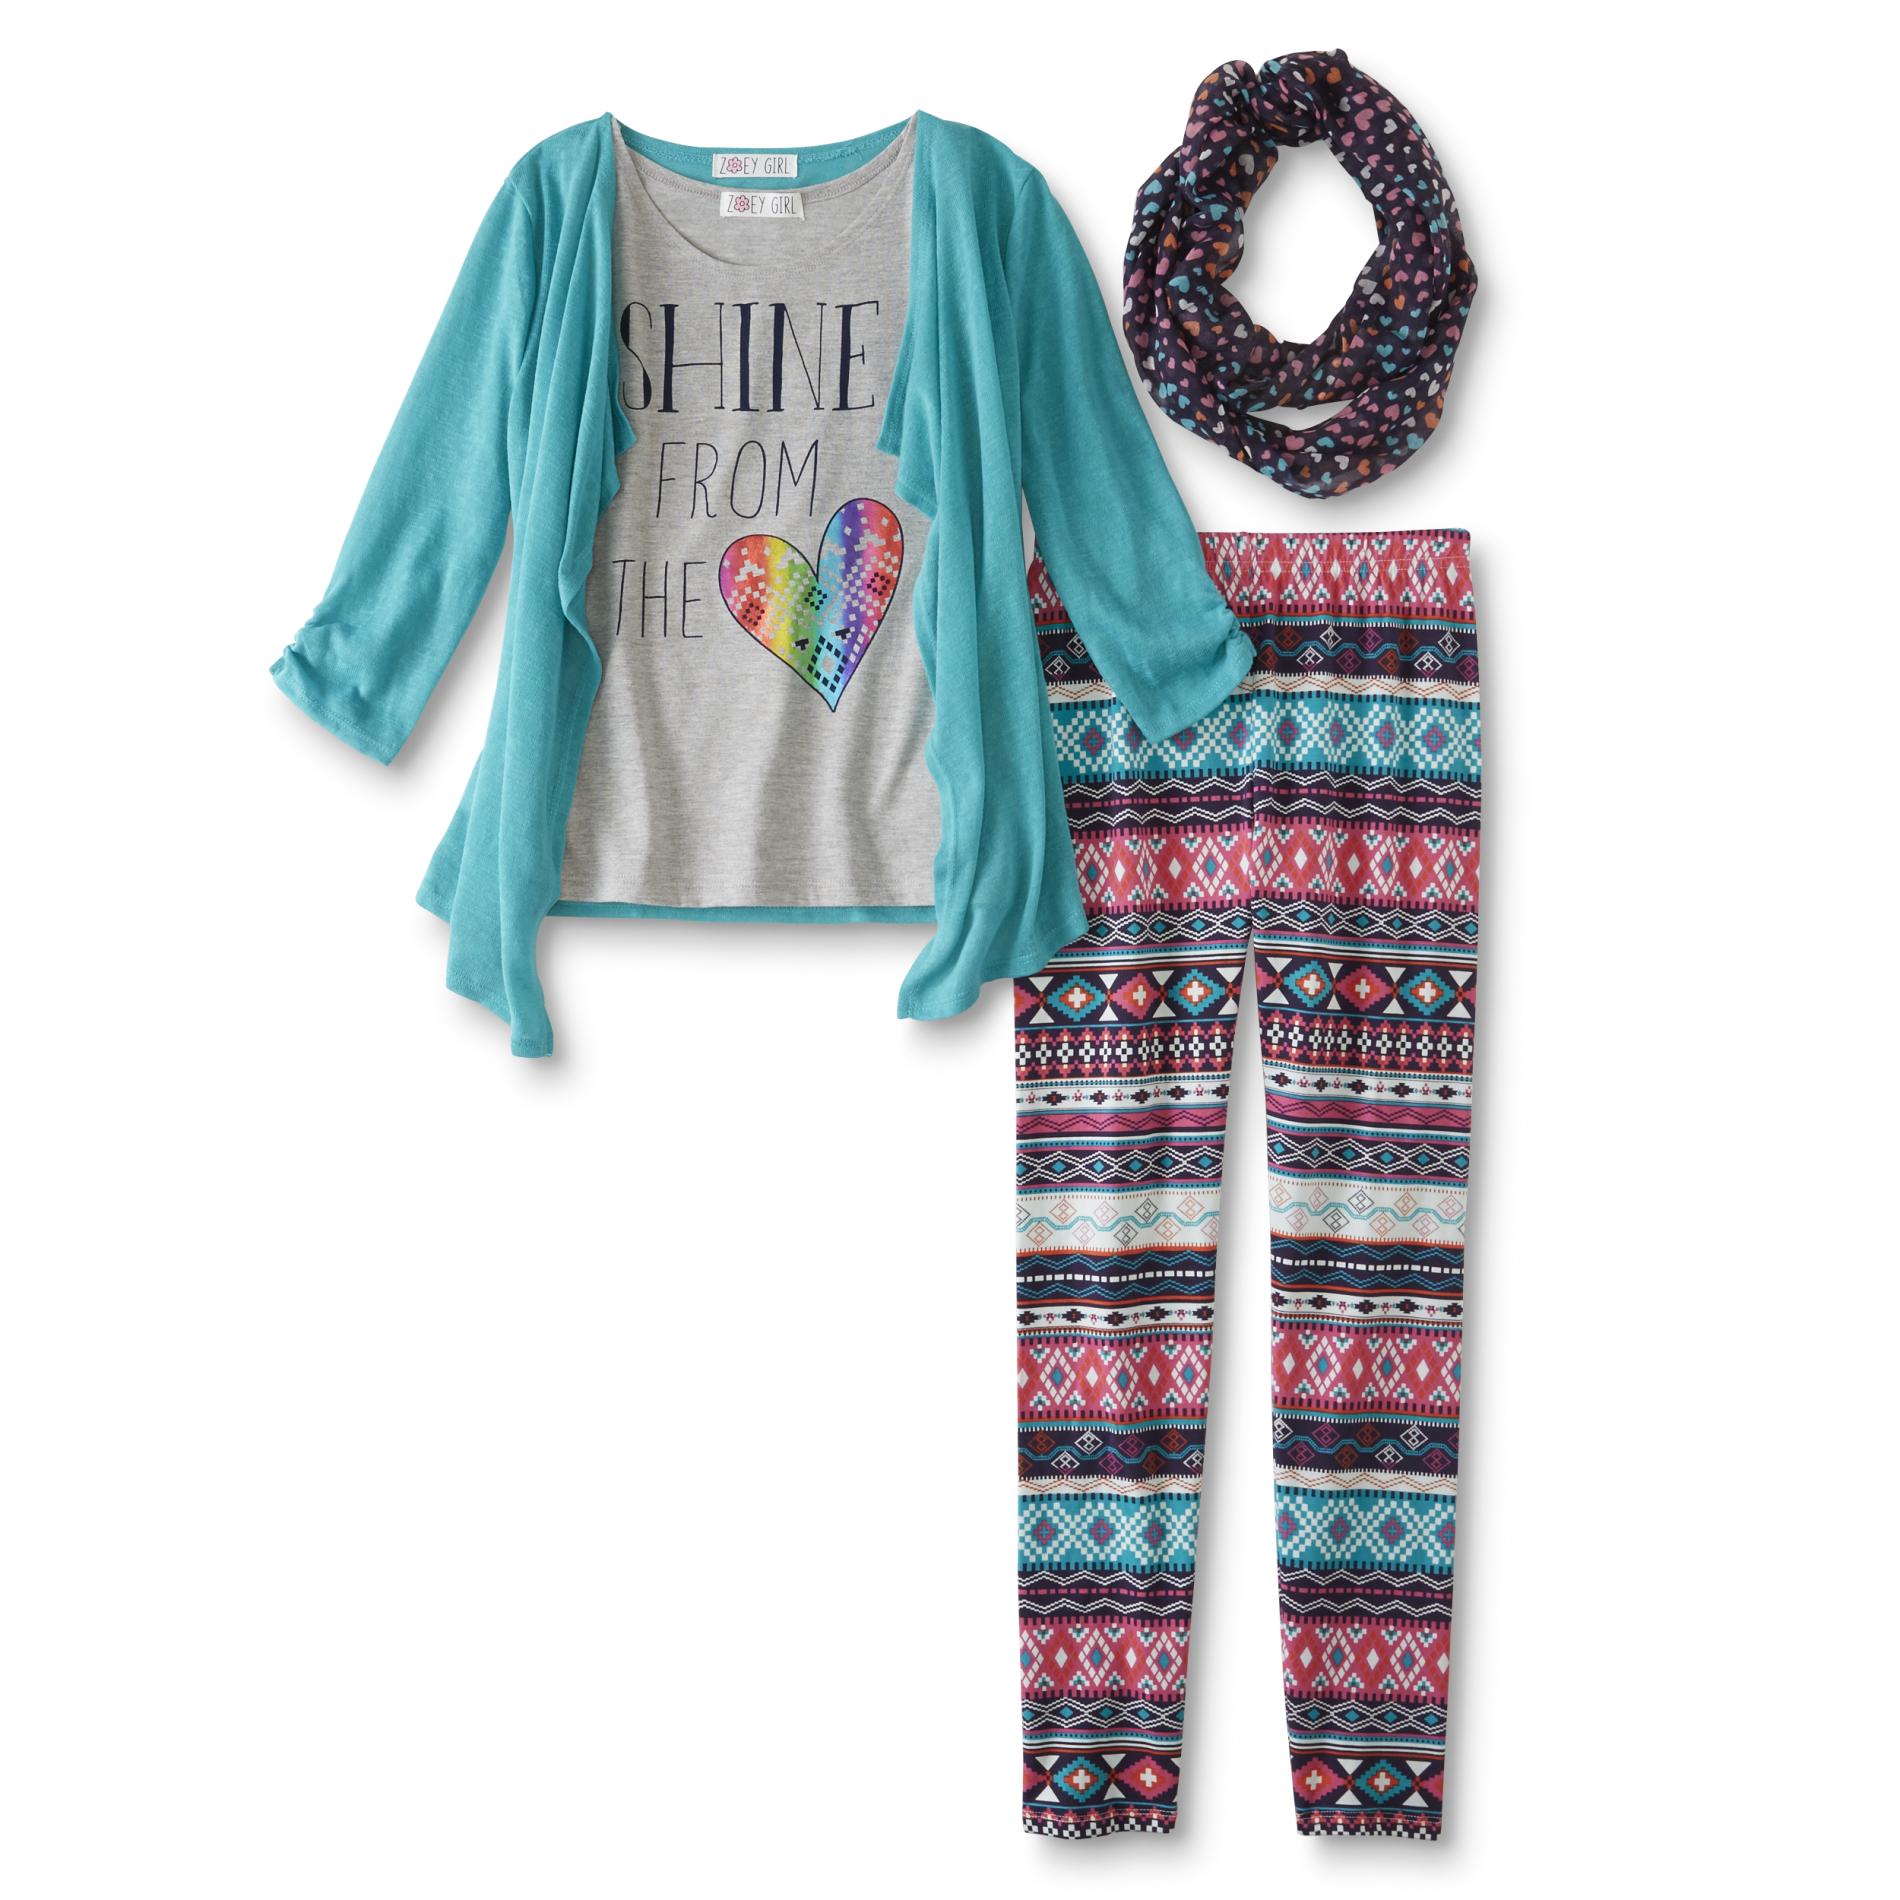 Girls' Cardigan, Top, Scarf & Leggings - Shine From The Heart